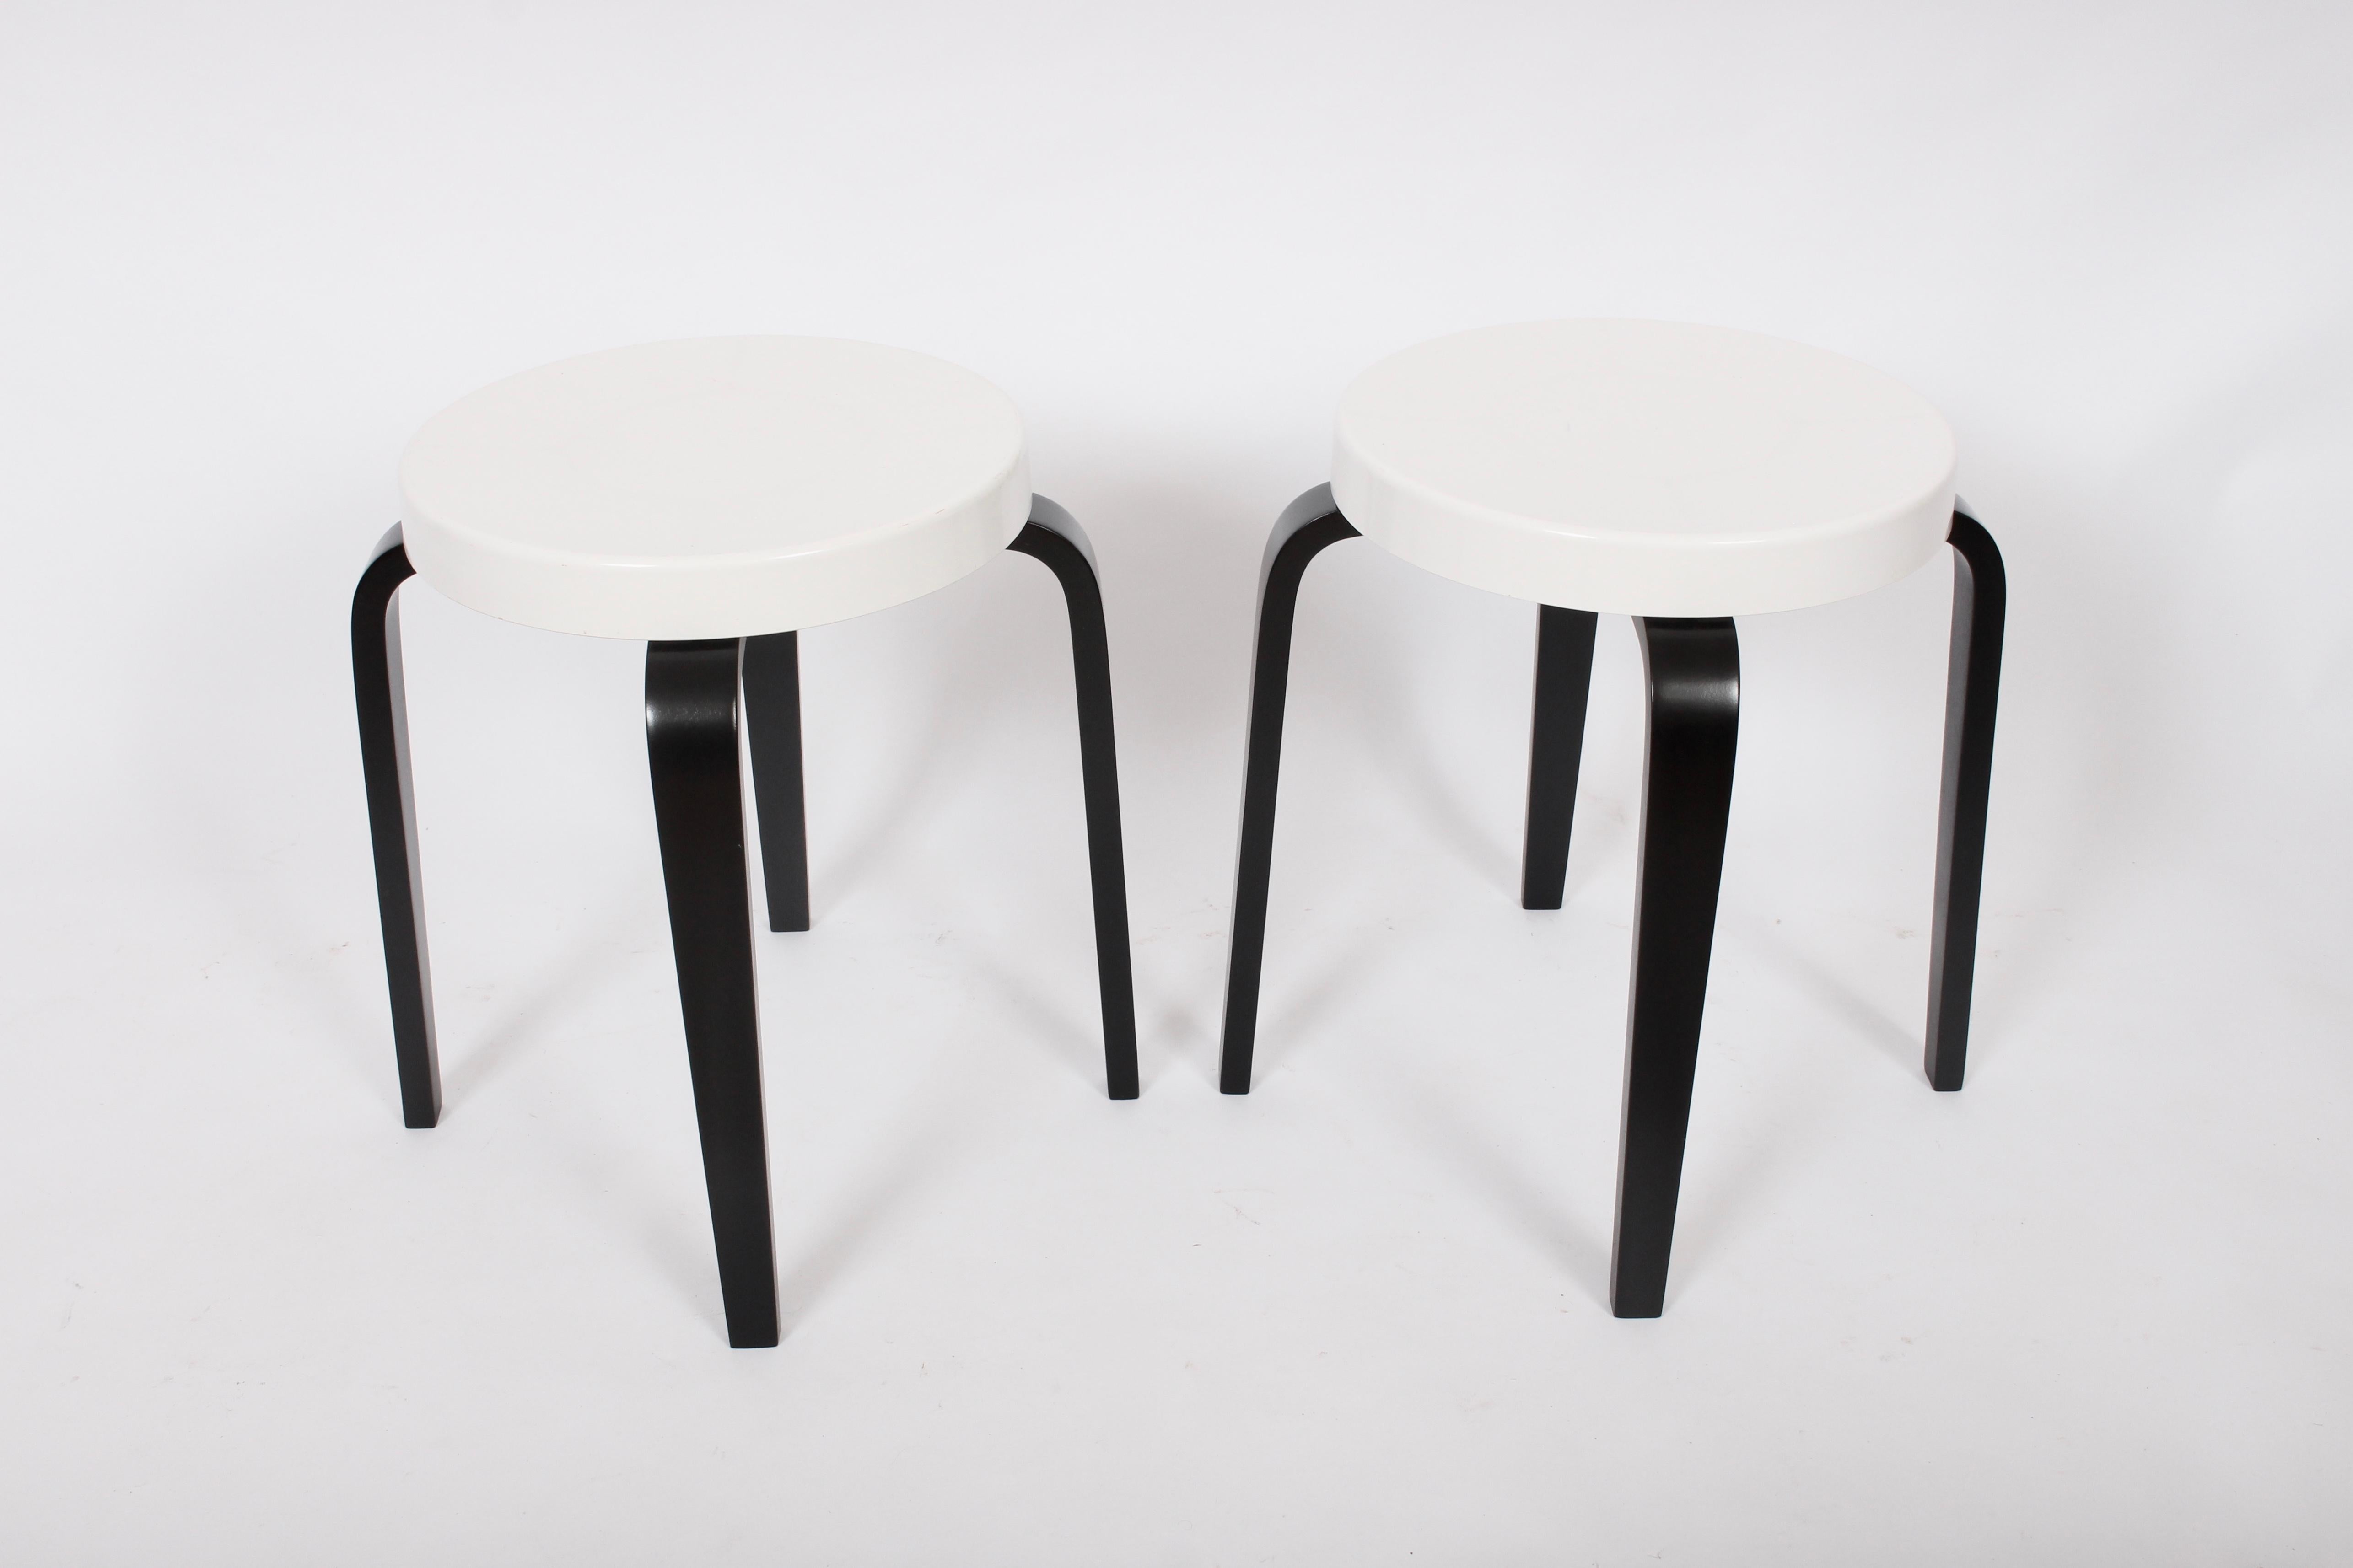 Pair of Thonet White and Black Bakelite Stacking Stools, 1930s For Sale 7